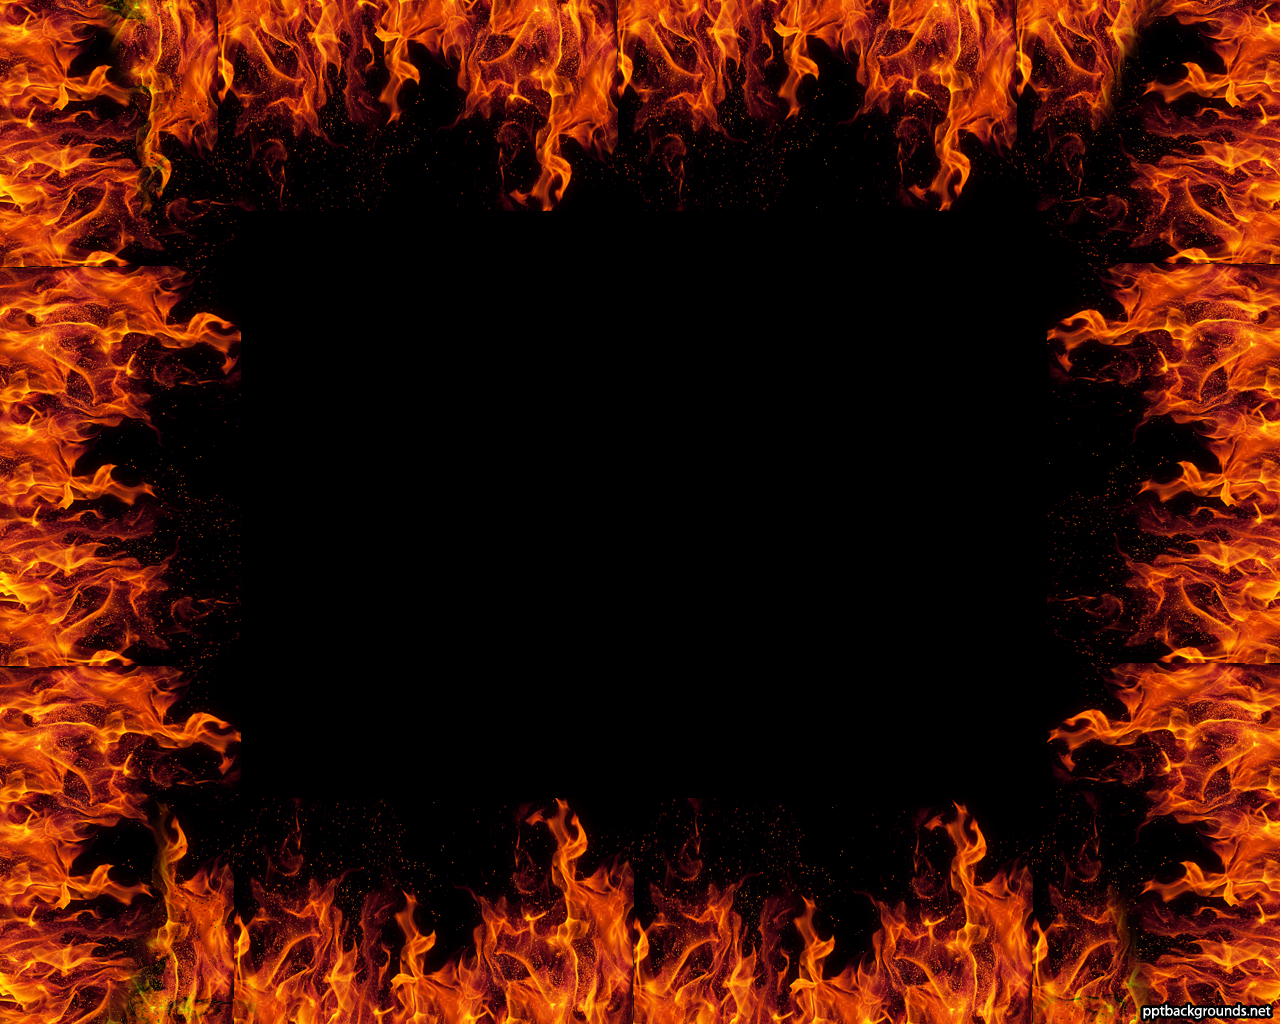 Fire Border with Flames powerpoint background